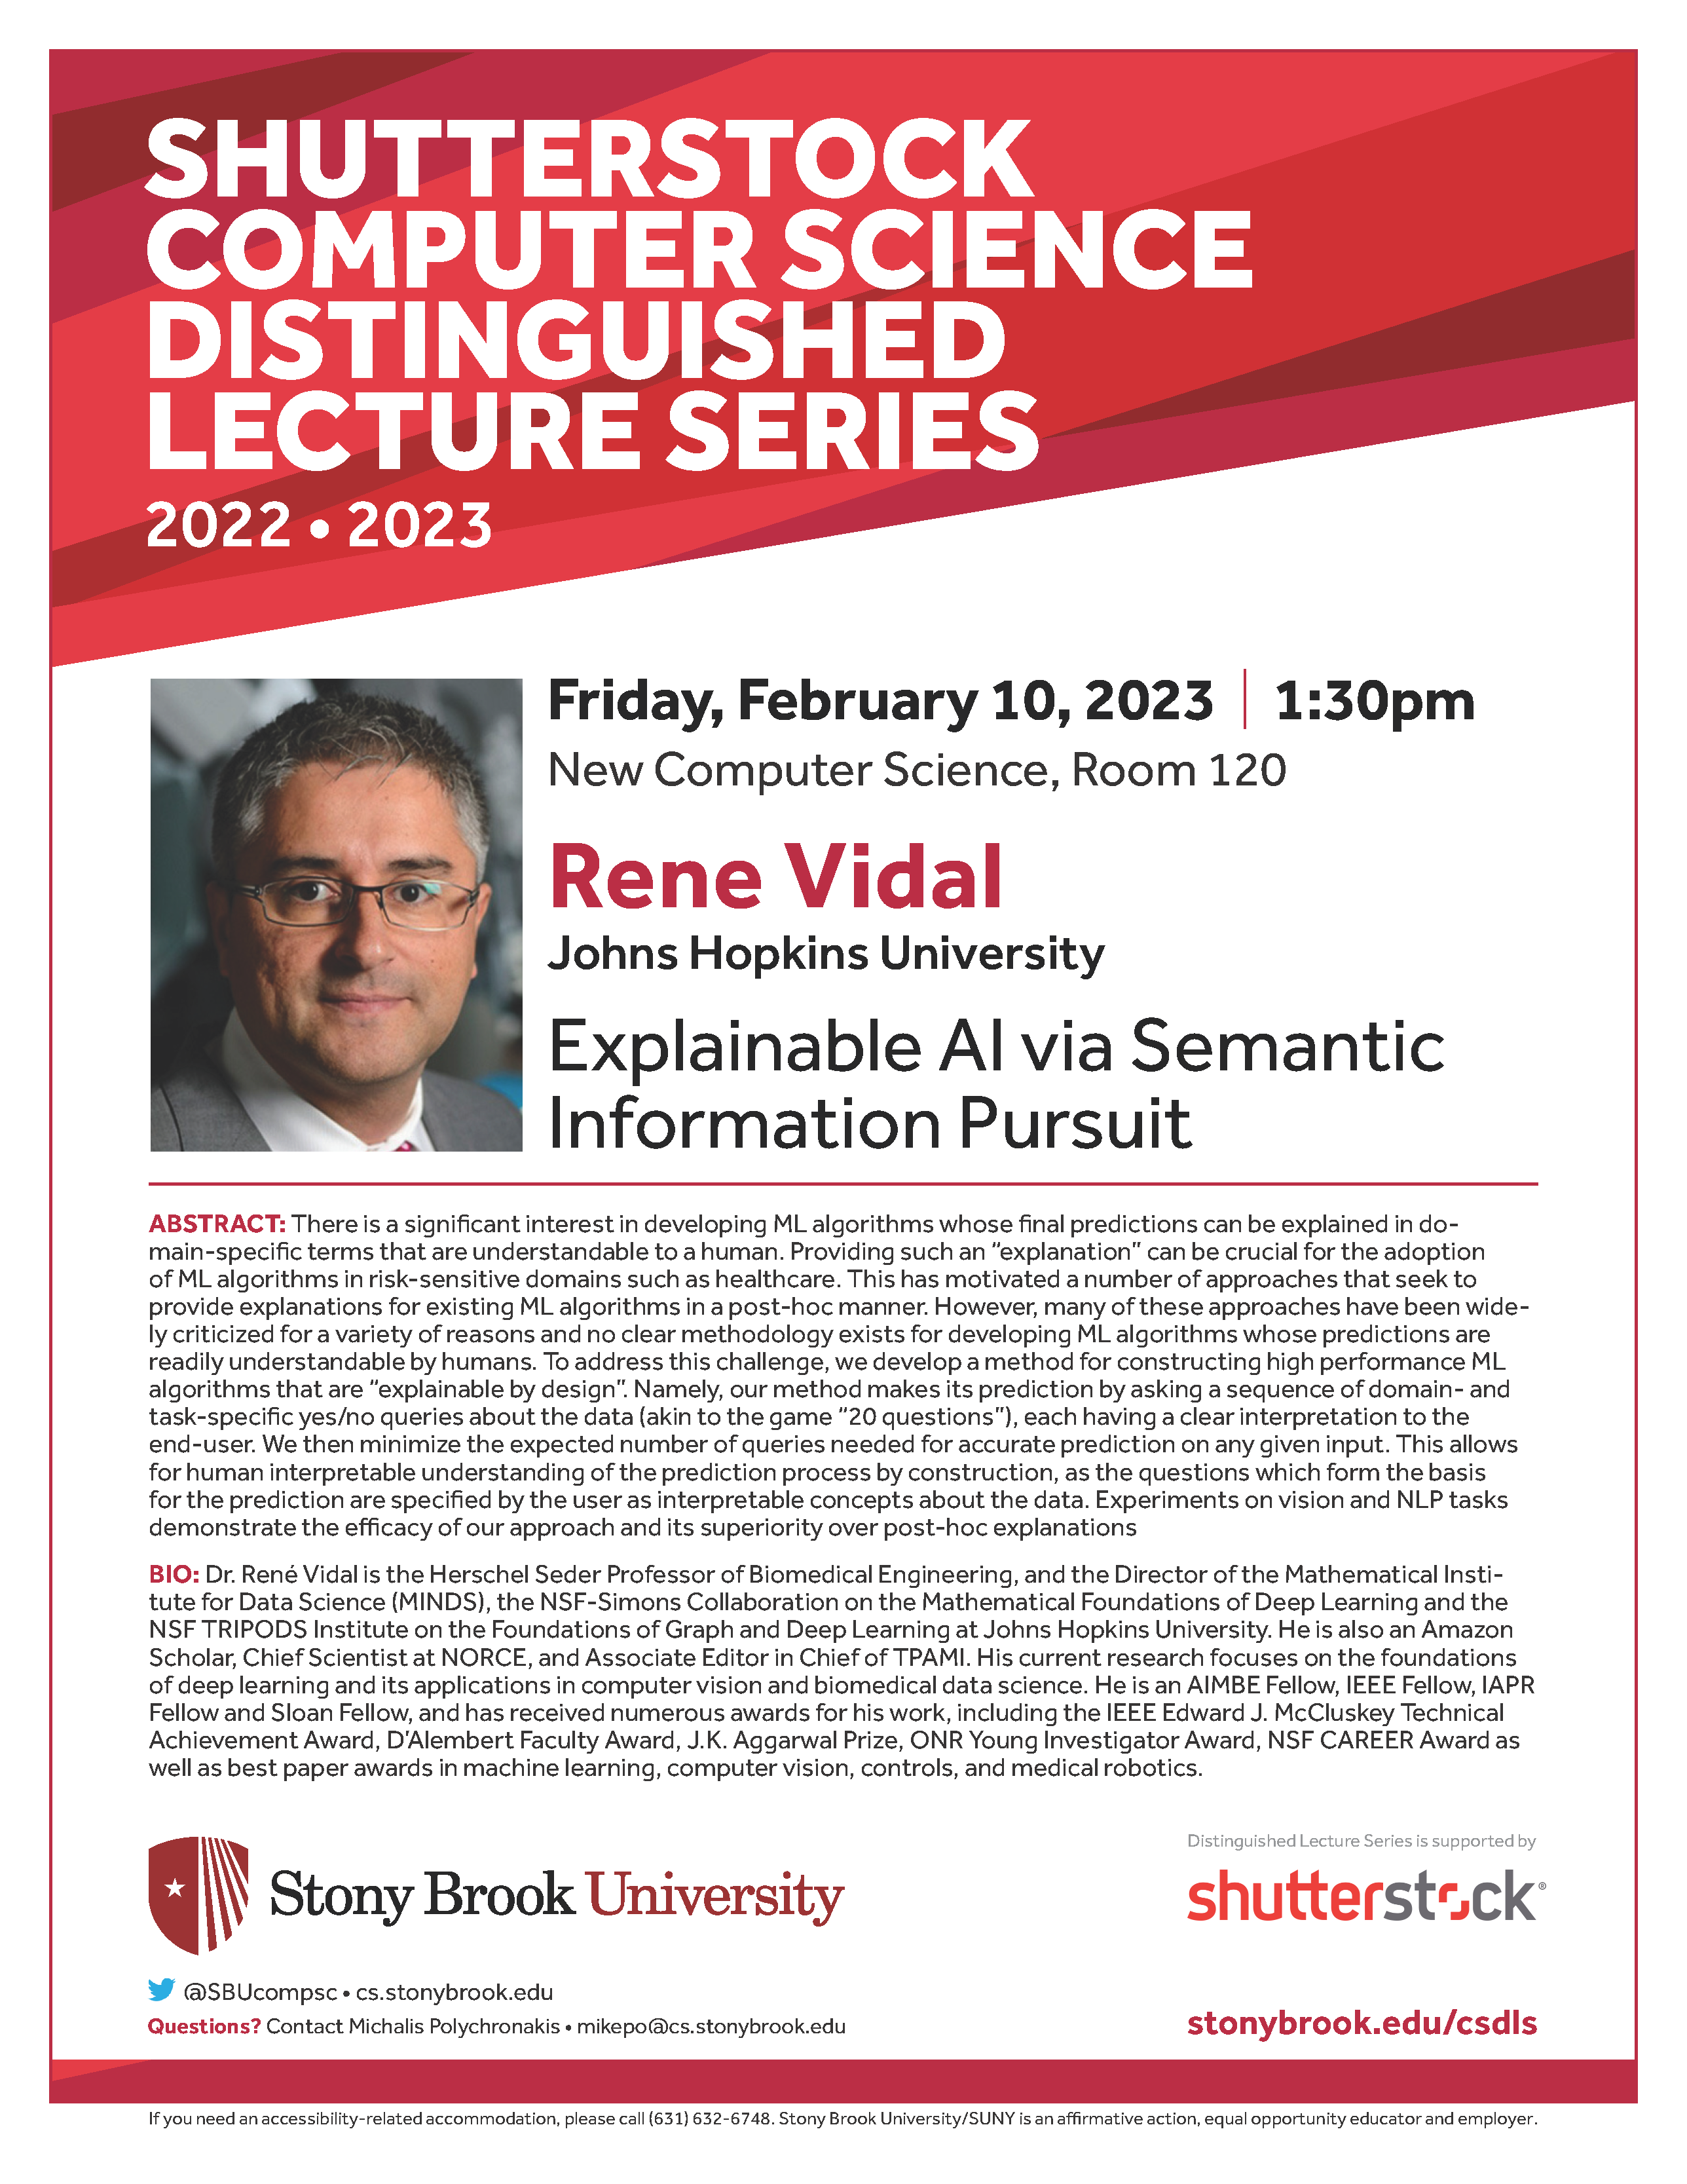 Lecture on February 10 at 1:30p in Room 120 of New Computer Science.